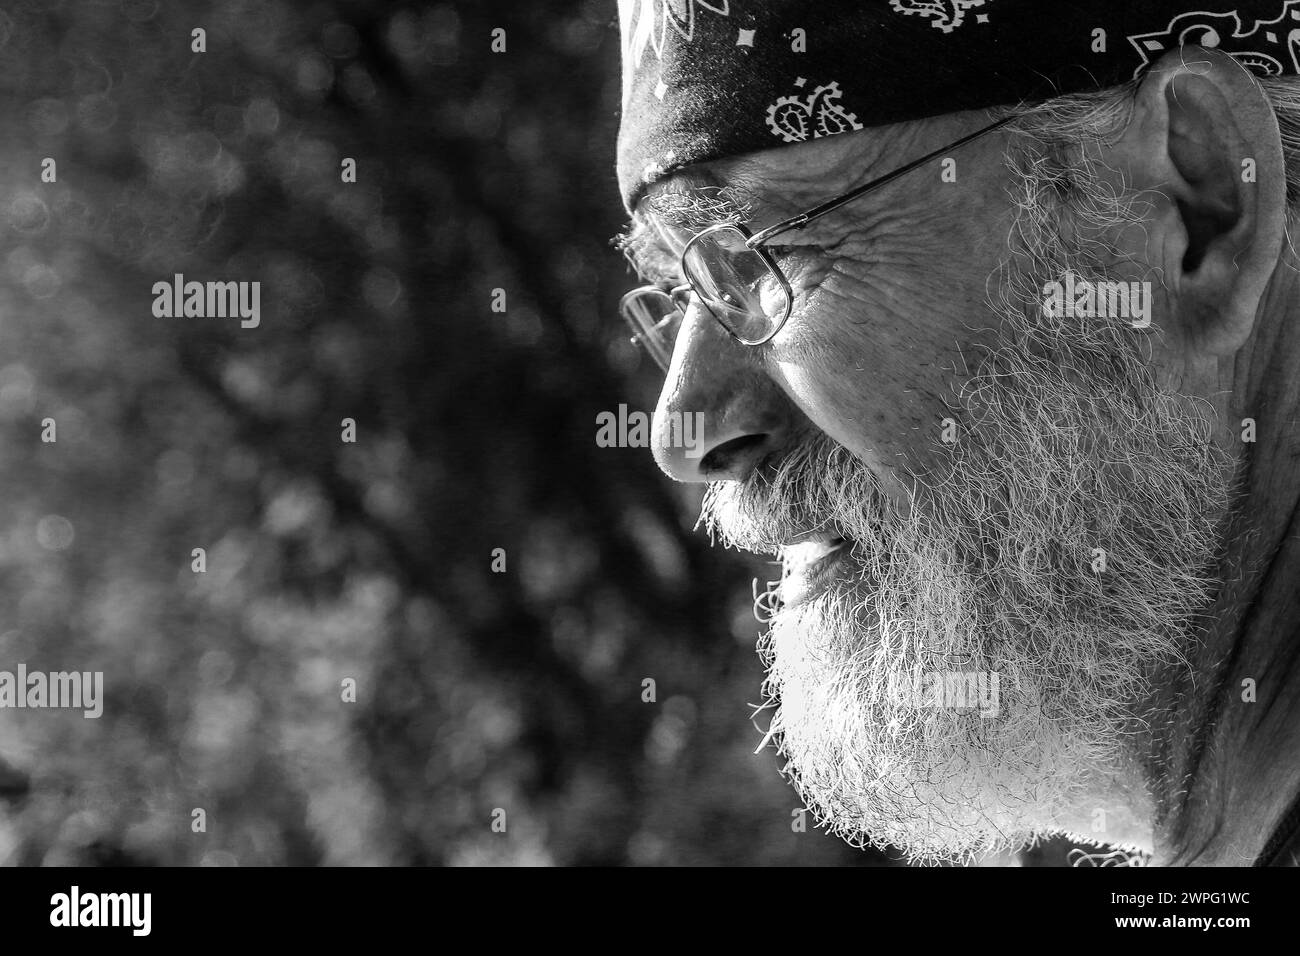 Close-up of old Hippie man wearing a bandana and glasses with a gray beard deep in thought, thinking memories perhaps with regret or worry. Stock Photo